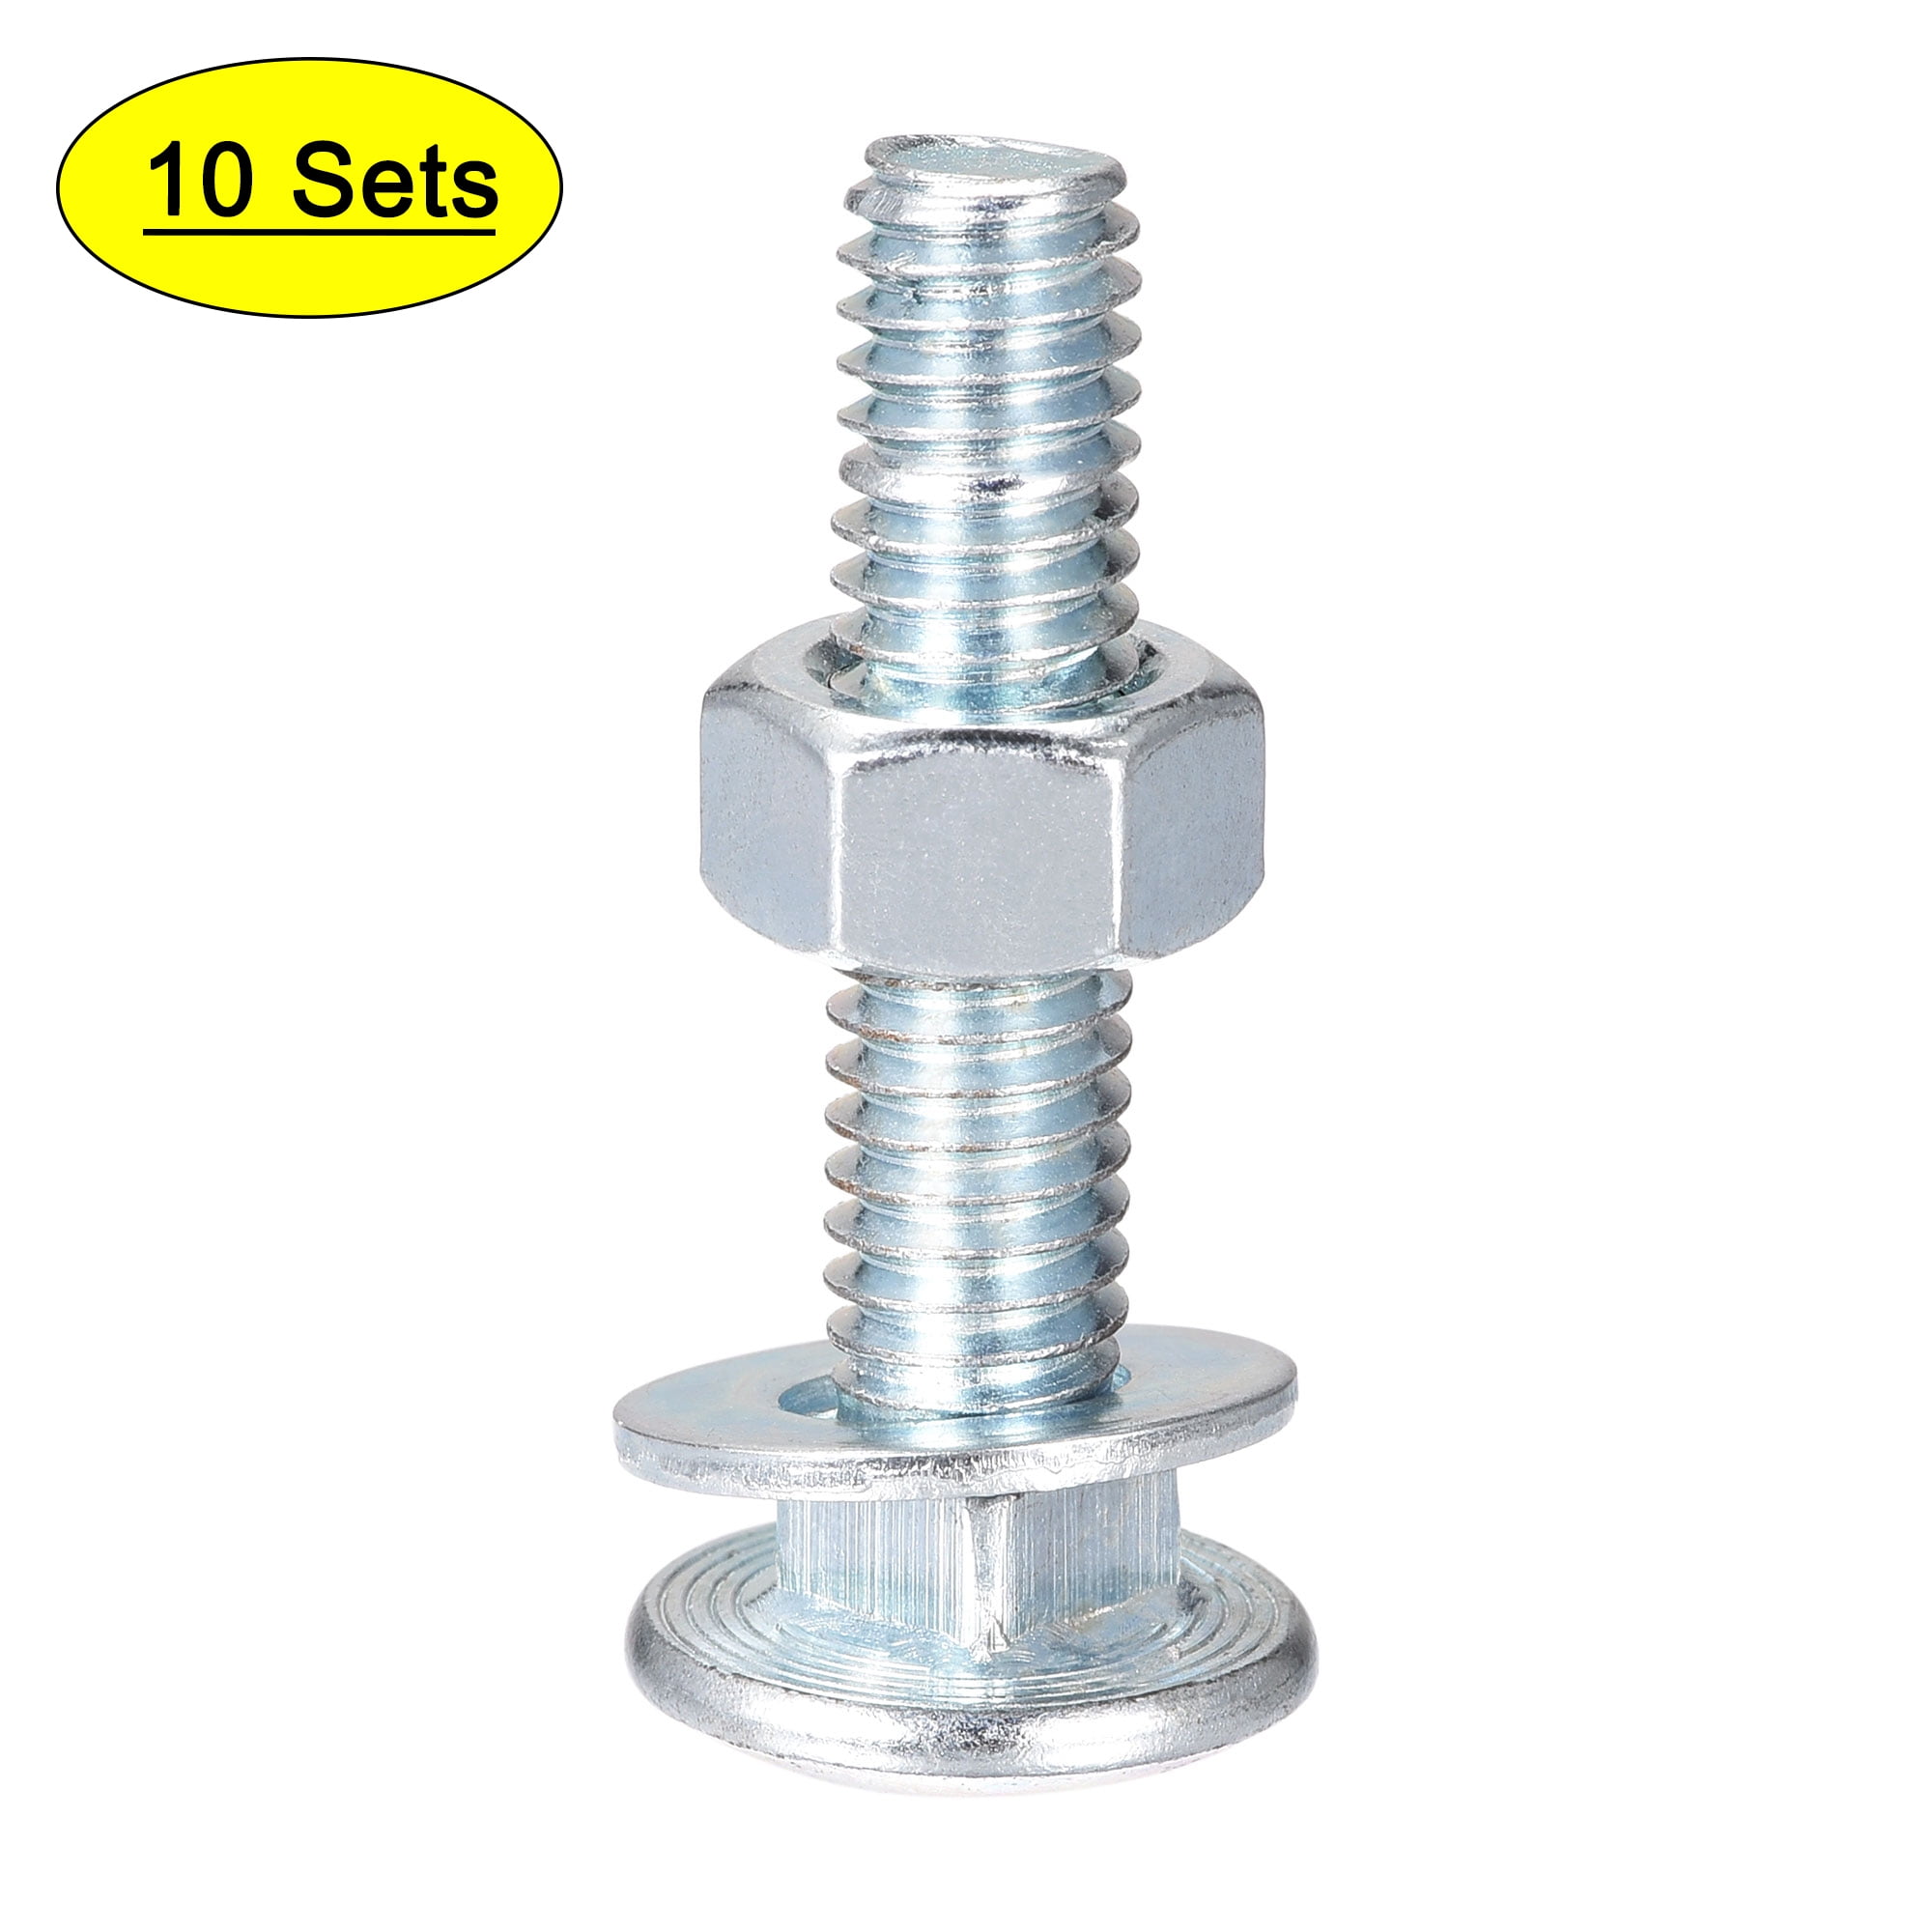 Washers 5/16 & 3/8 Lock nuts 1/4 Stainless Nut & Washer assortment #10 Flat 